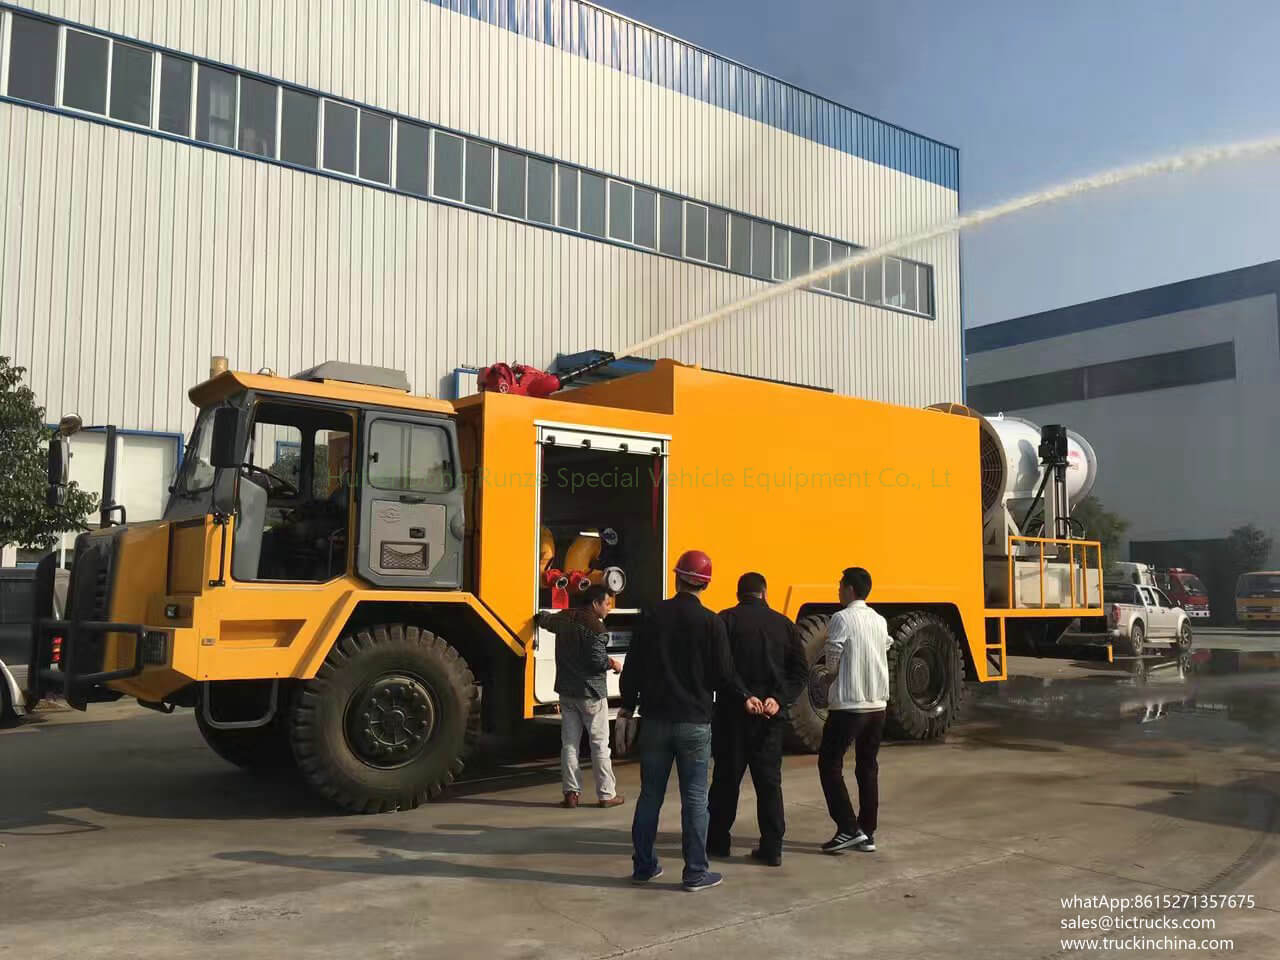 Mine fire fighting truck with fine water spray cannon for dust control 